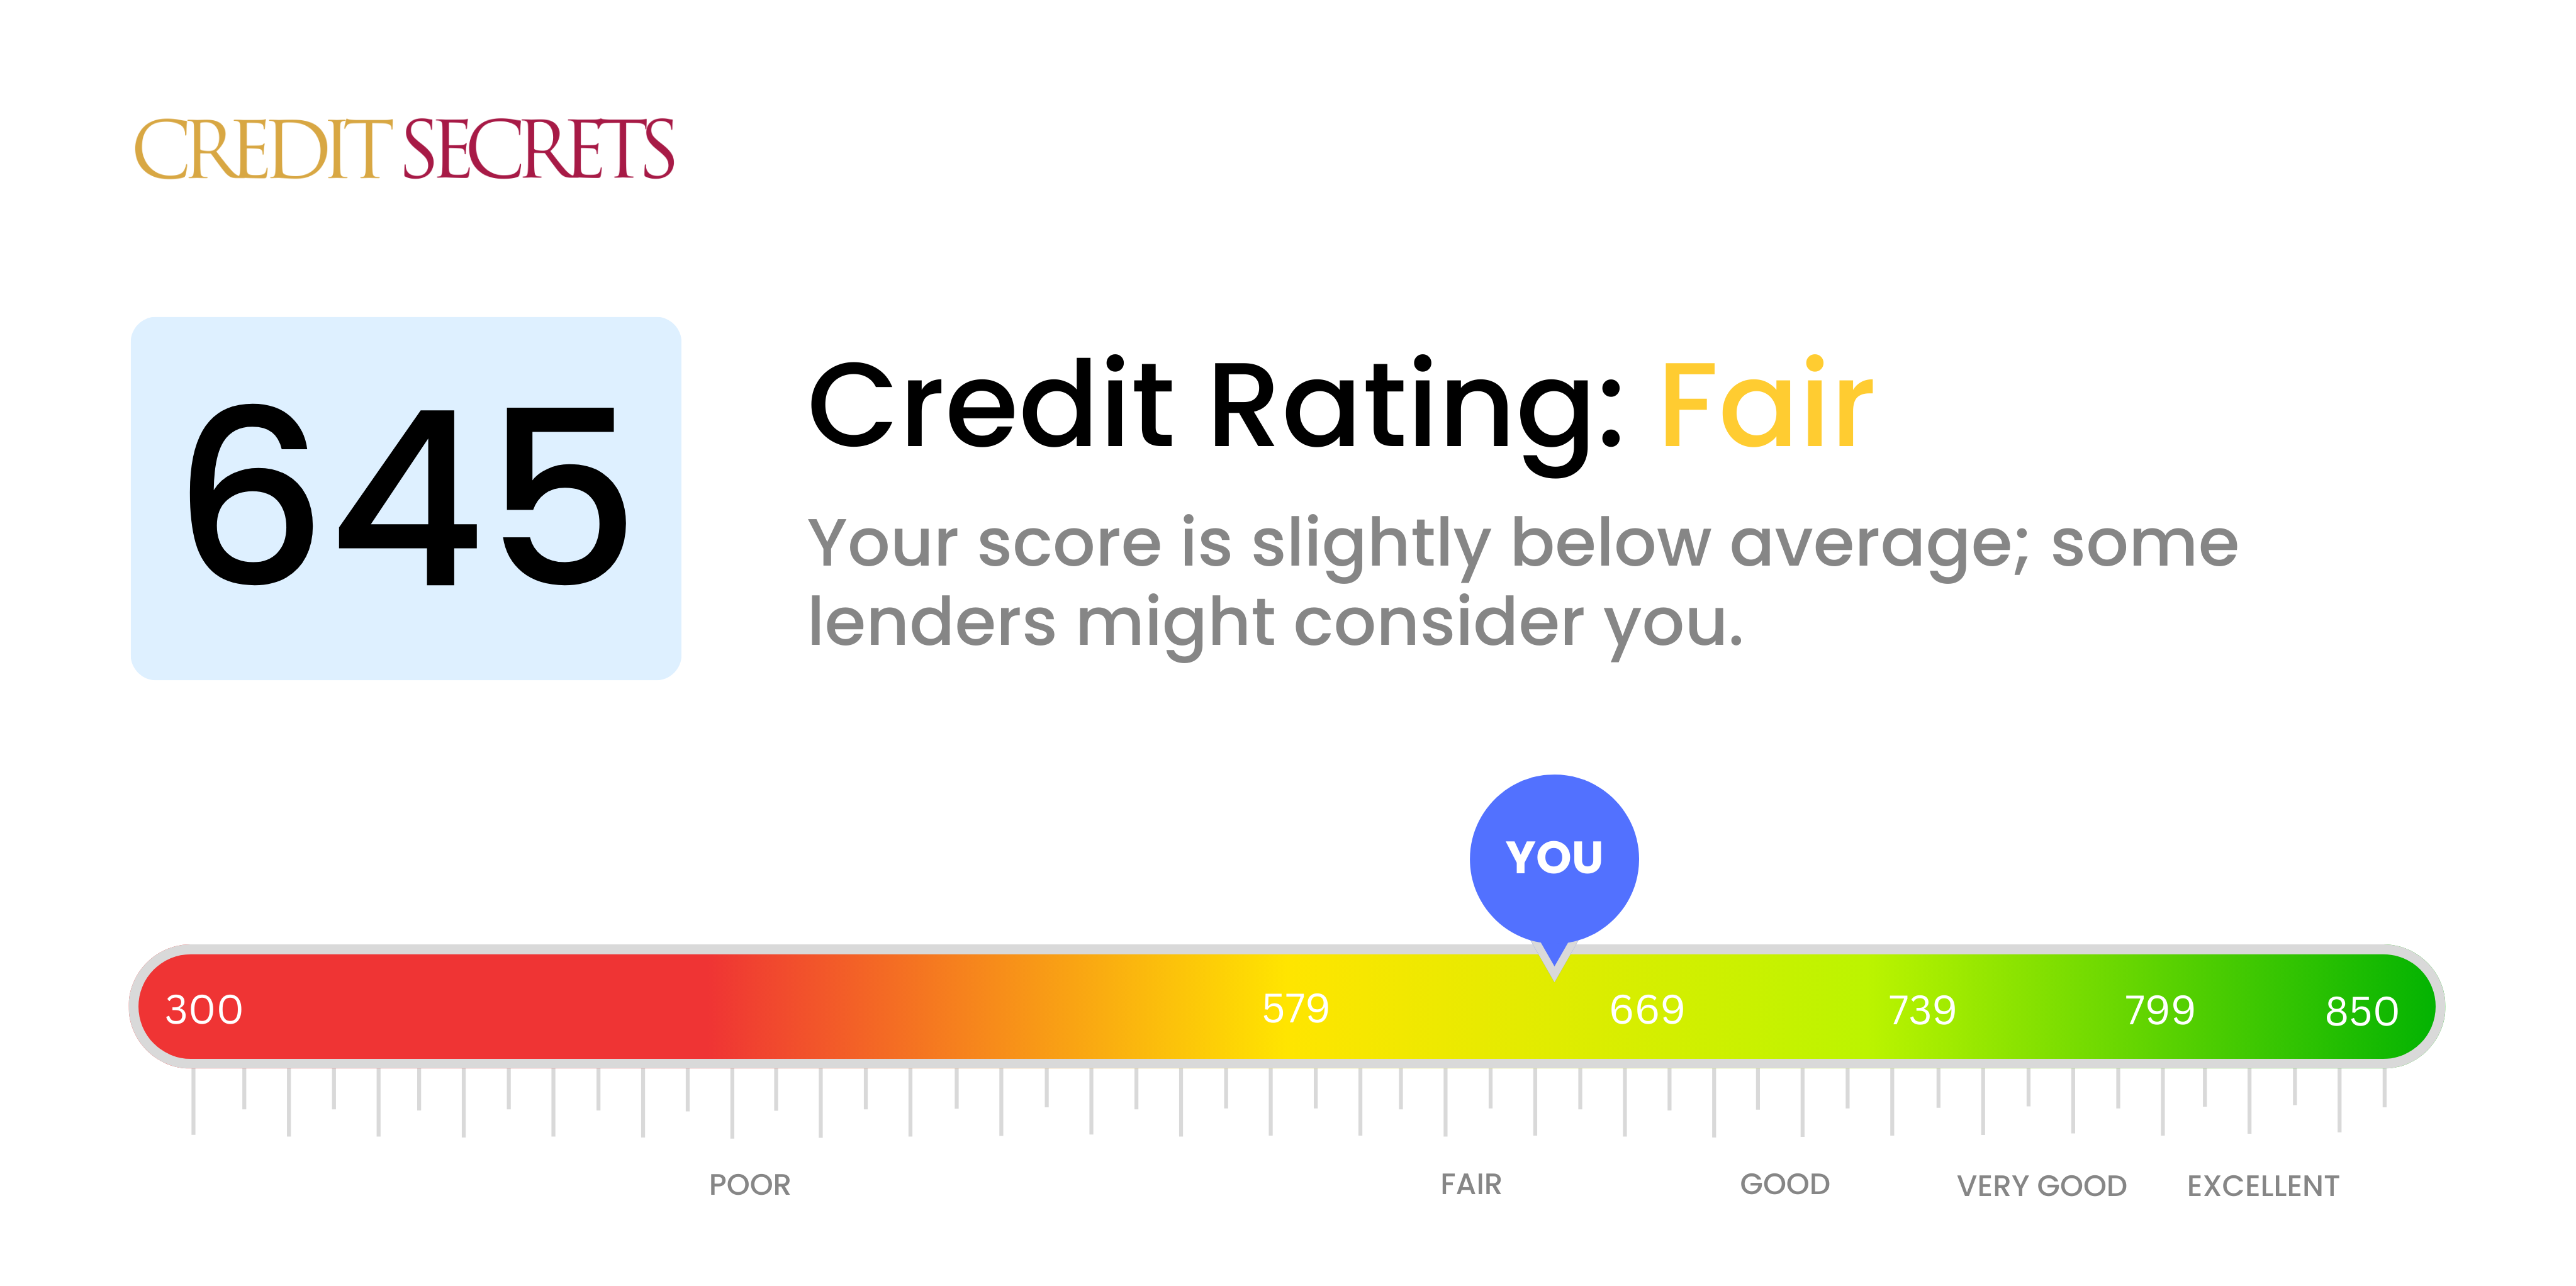 Is 645 a good credit score?